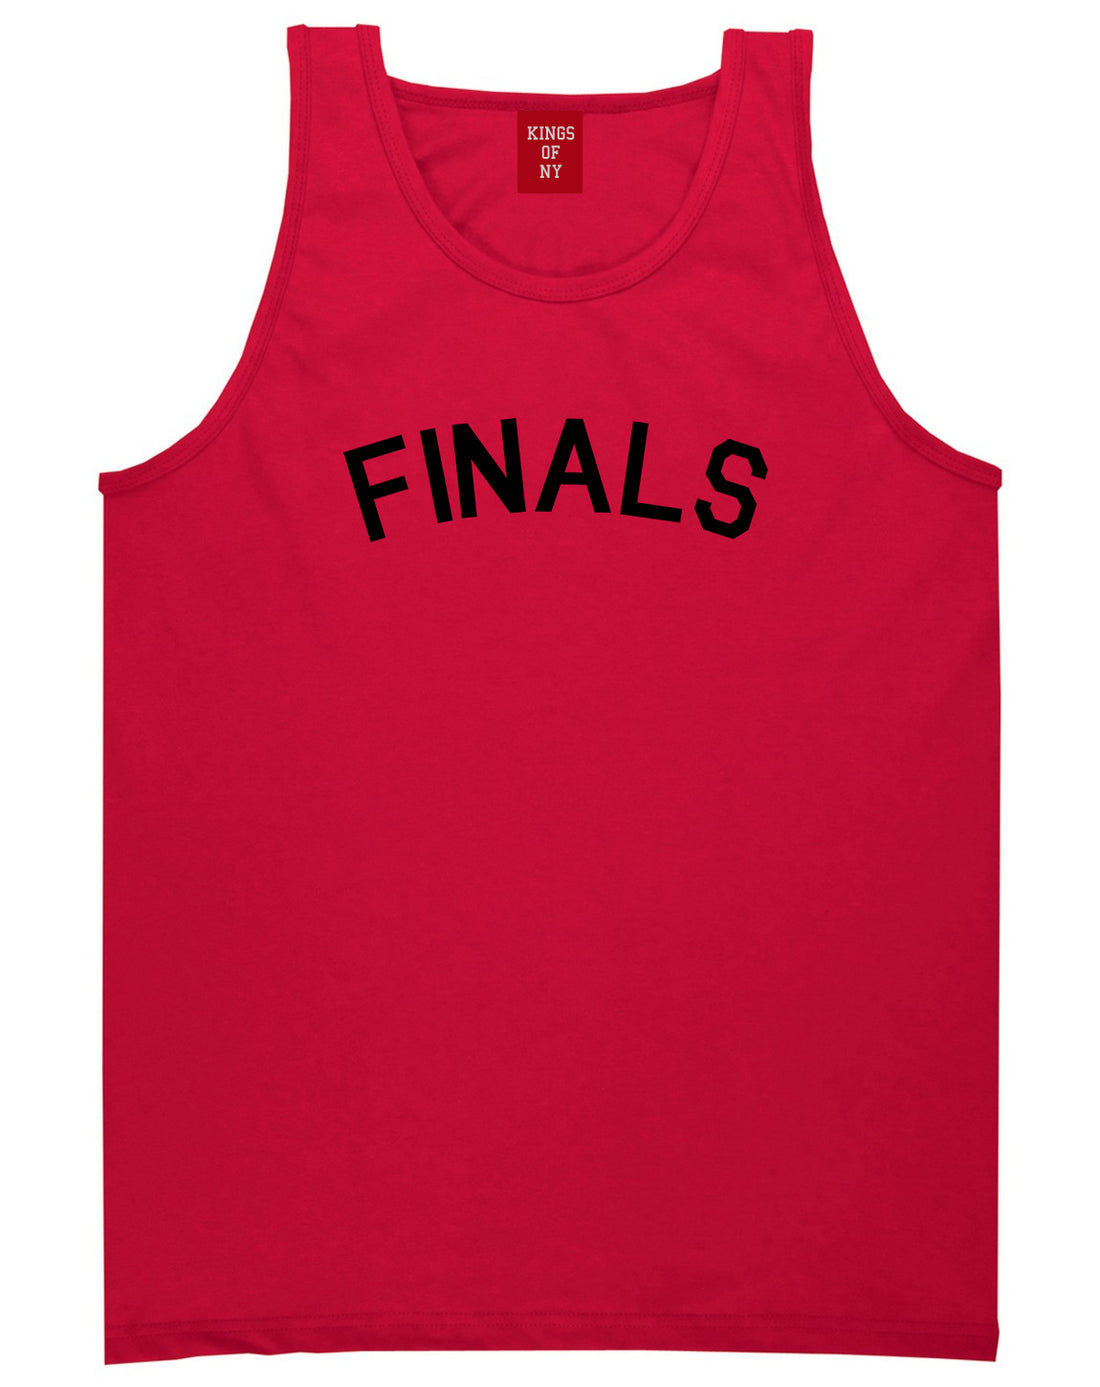 Finals Sports Mens Red Tank Top Shirt by KINGS OF NY